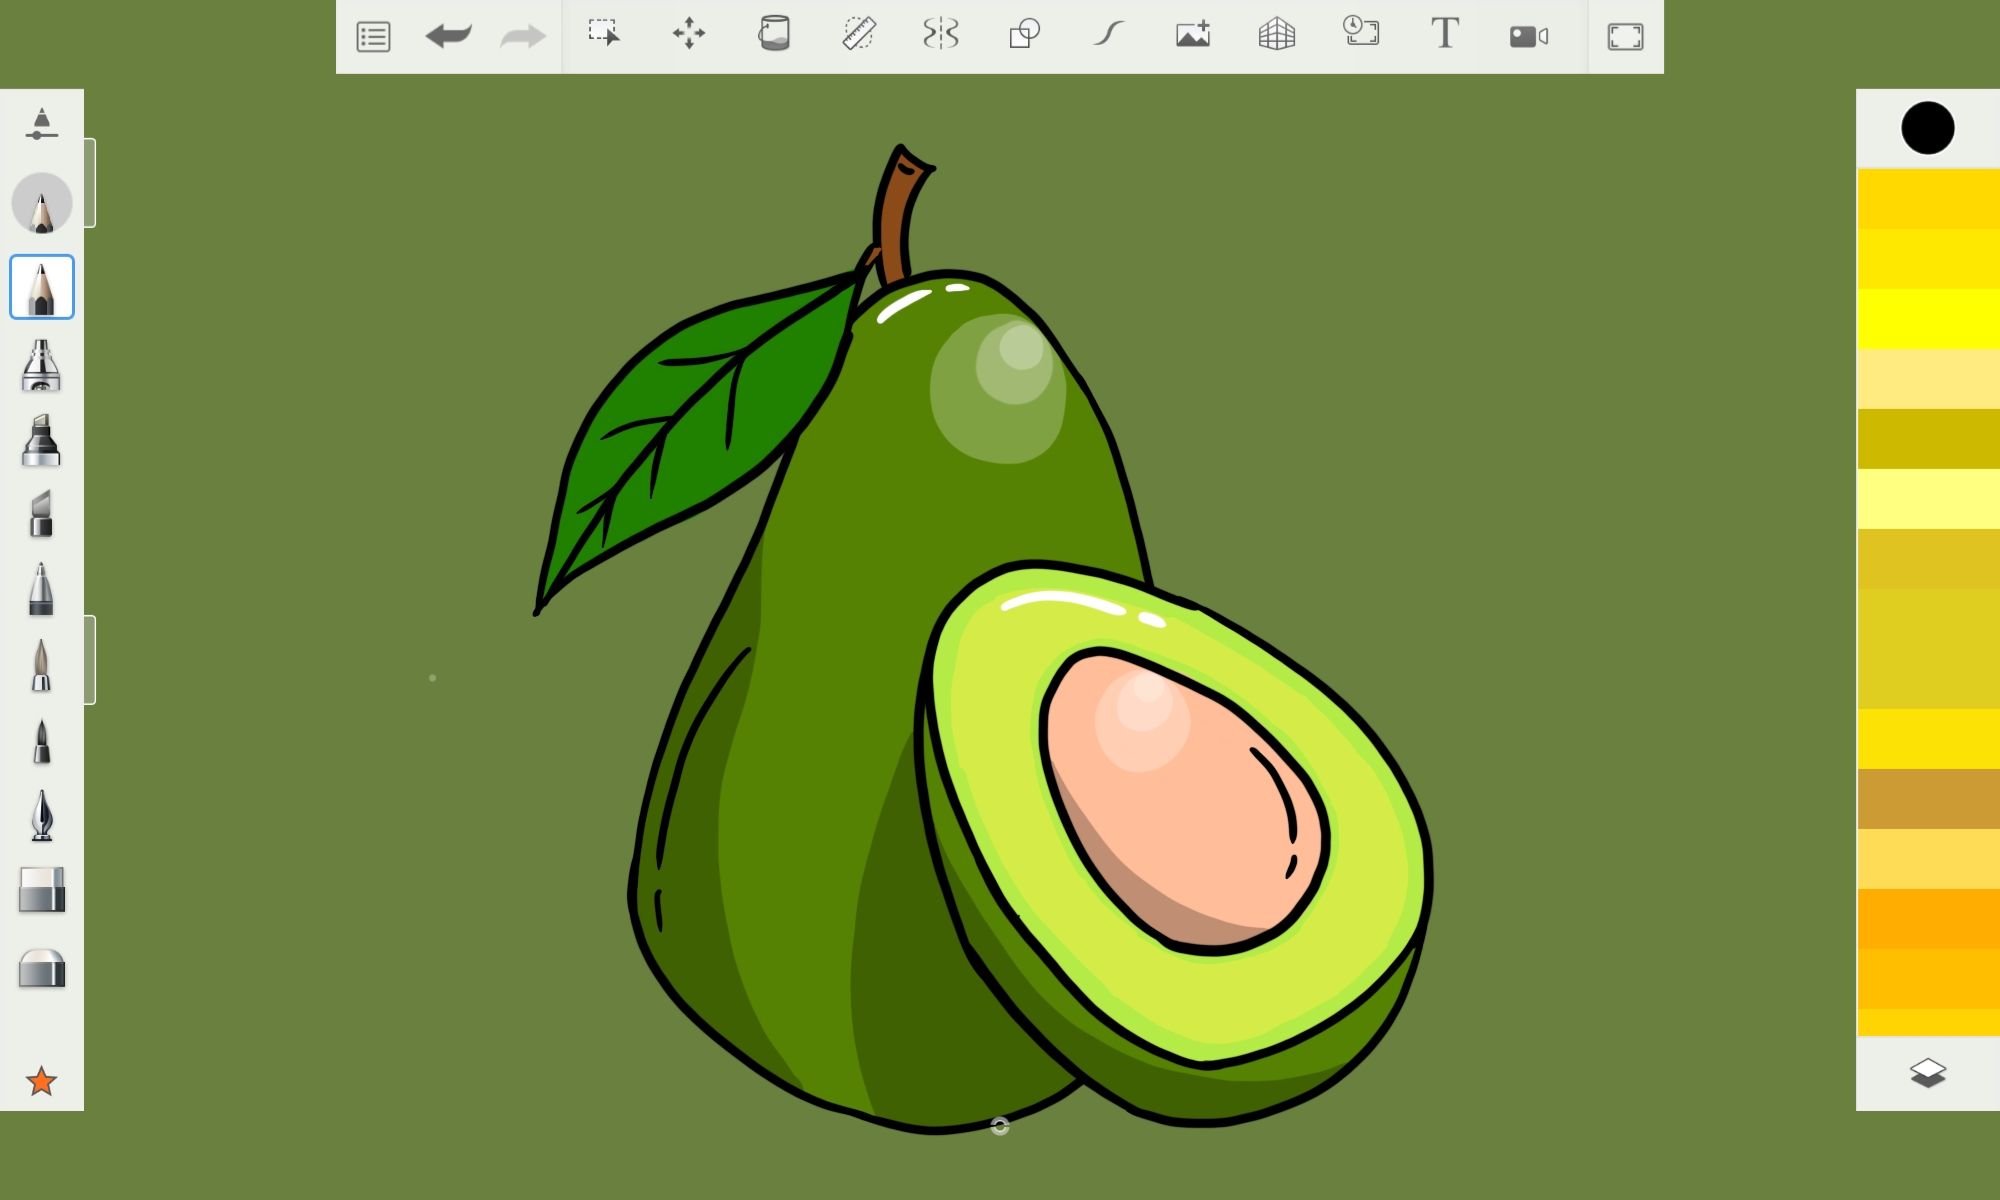 Drawing an Avocado in Sketchbook on Android.